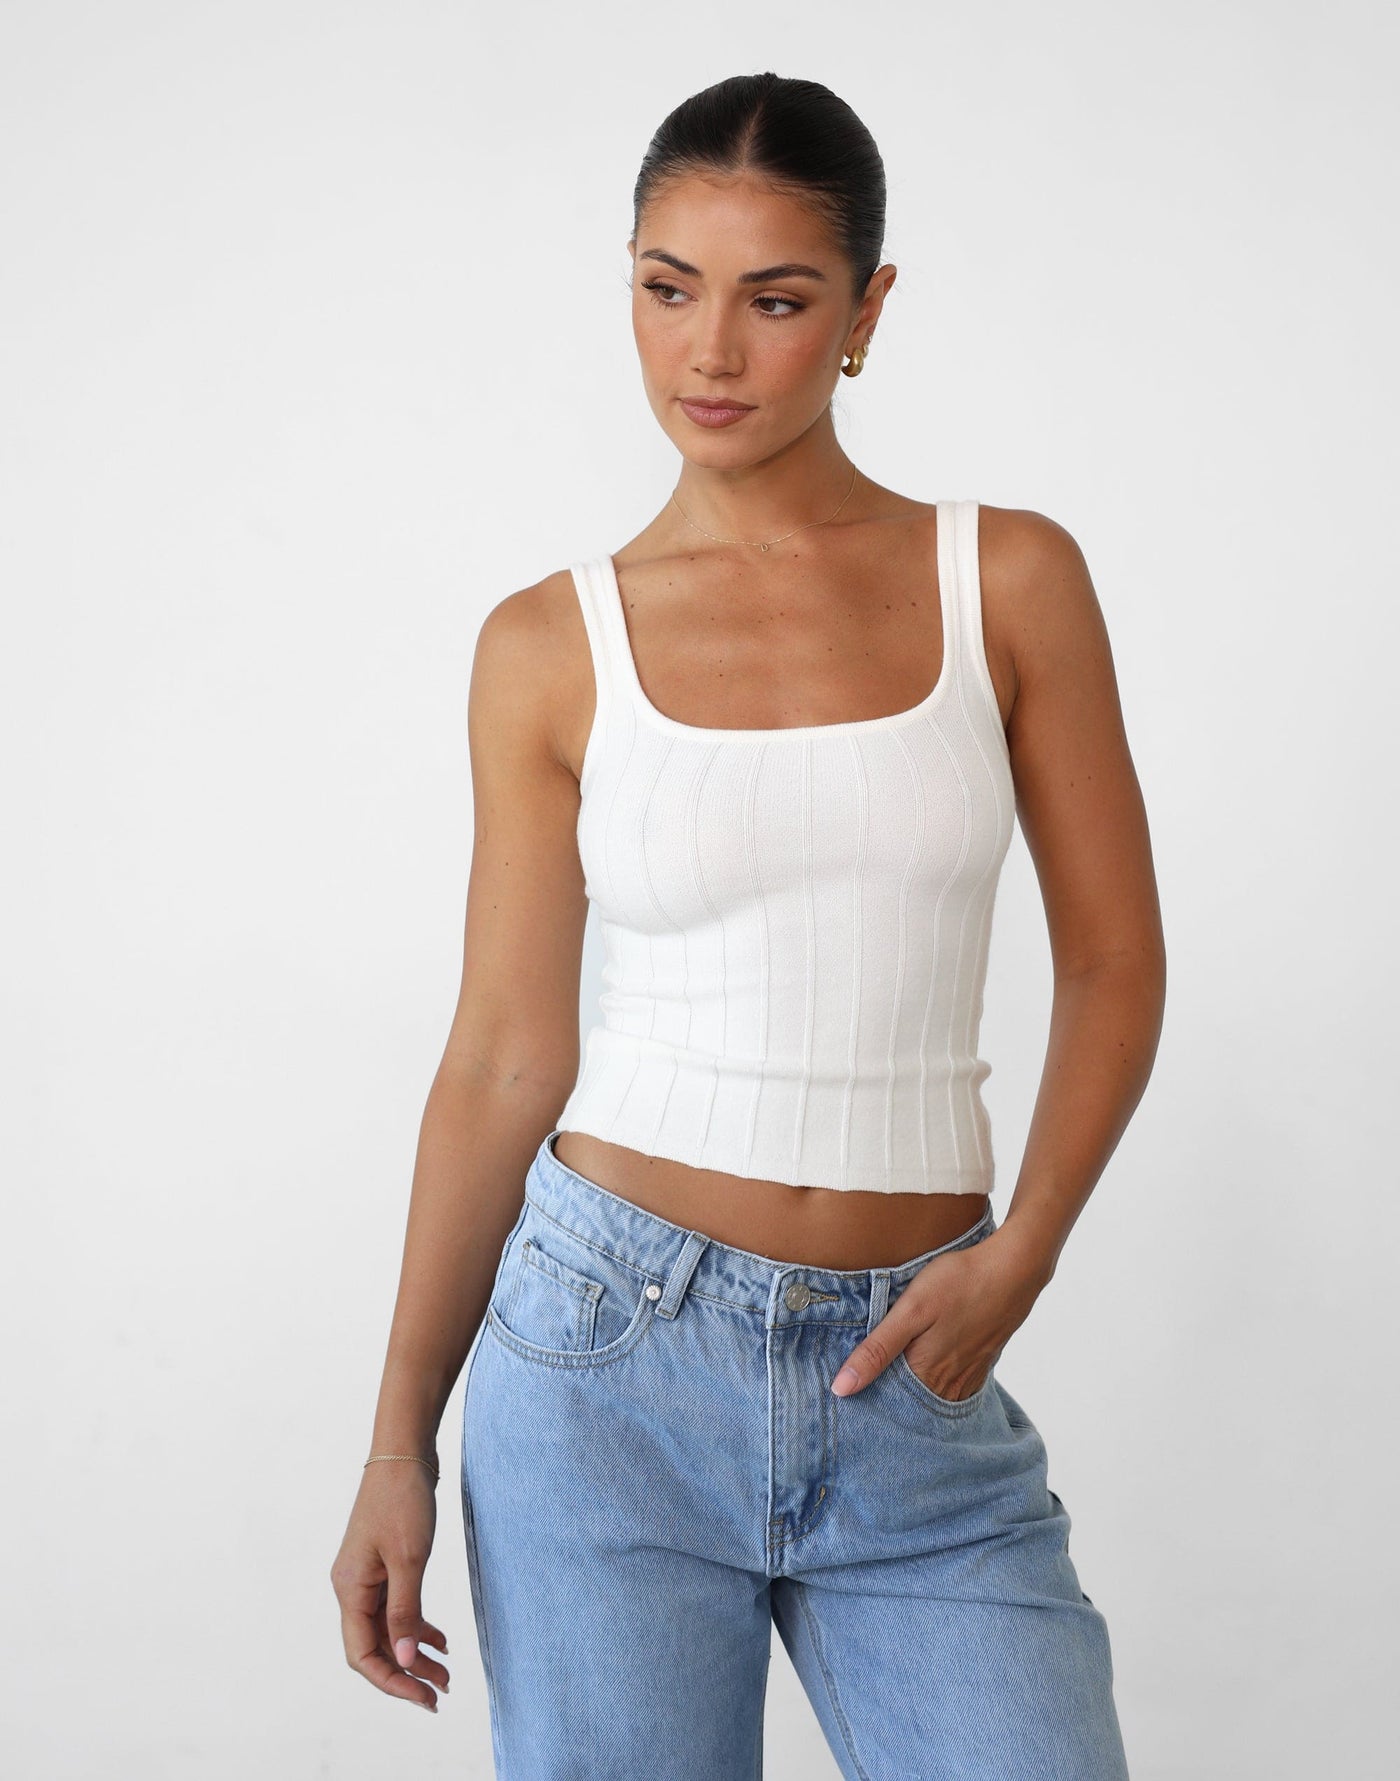 Ephemeral Top (Cream) - Scoop Neck Singlet Fitted Top - Women's Top - Charcoal Clothing